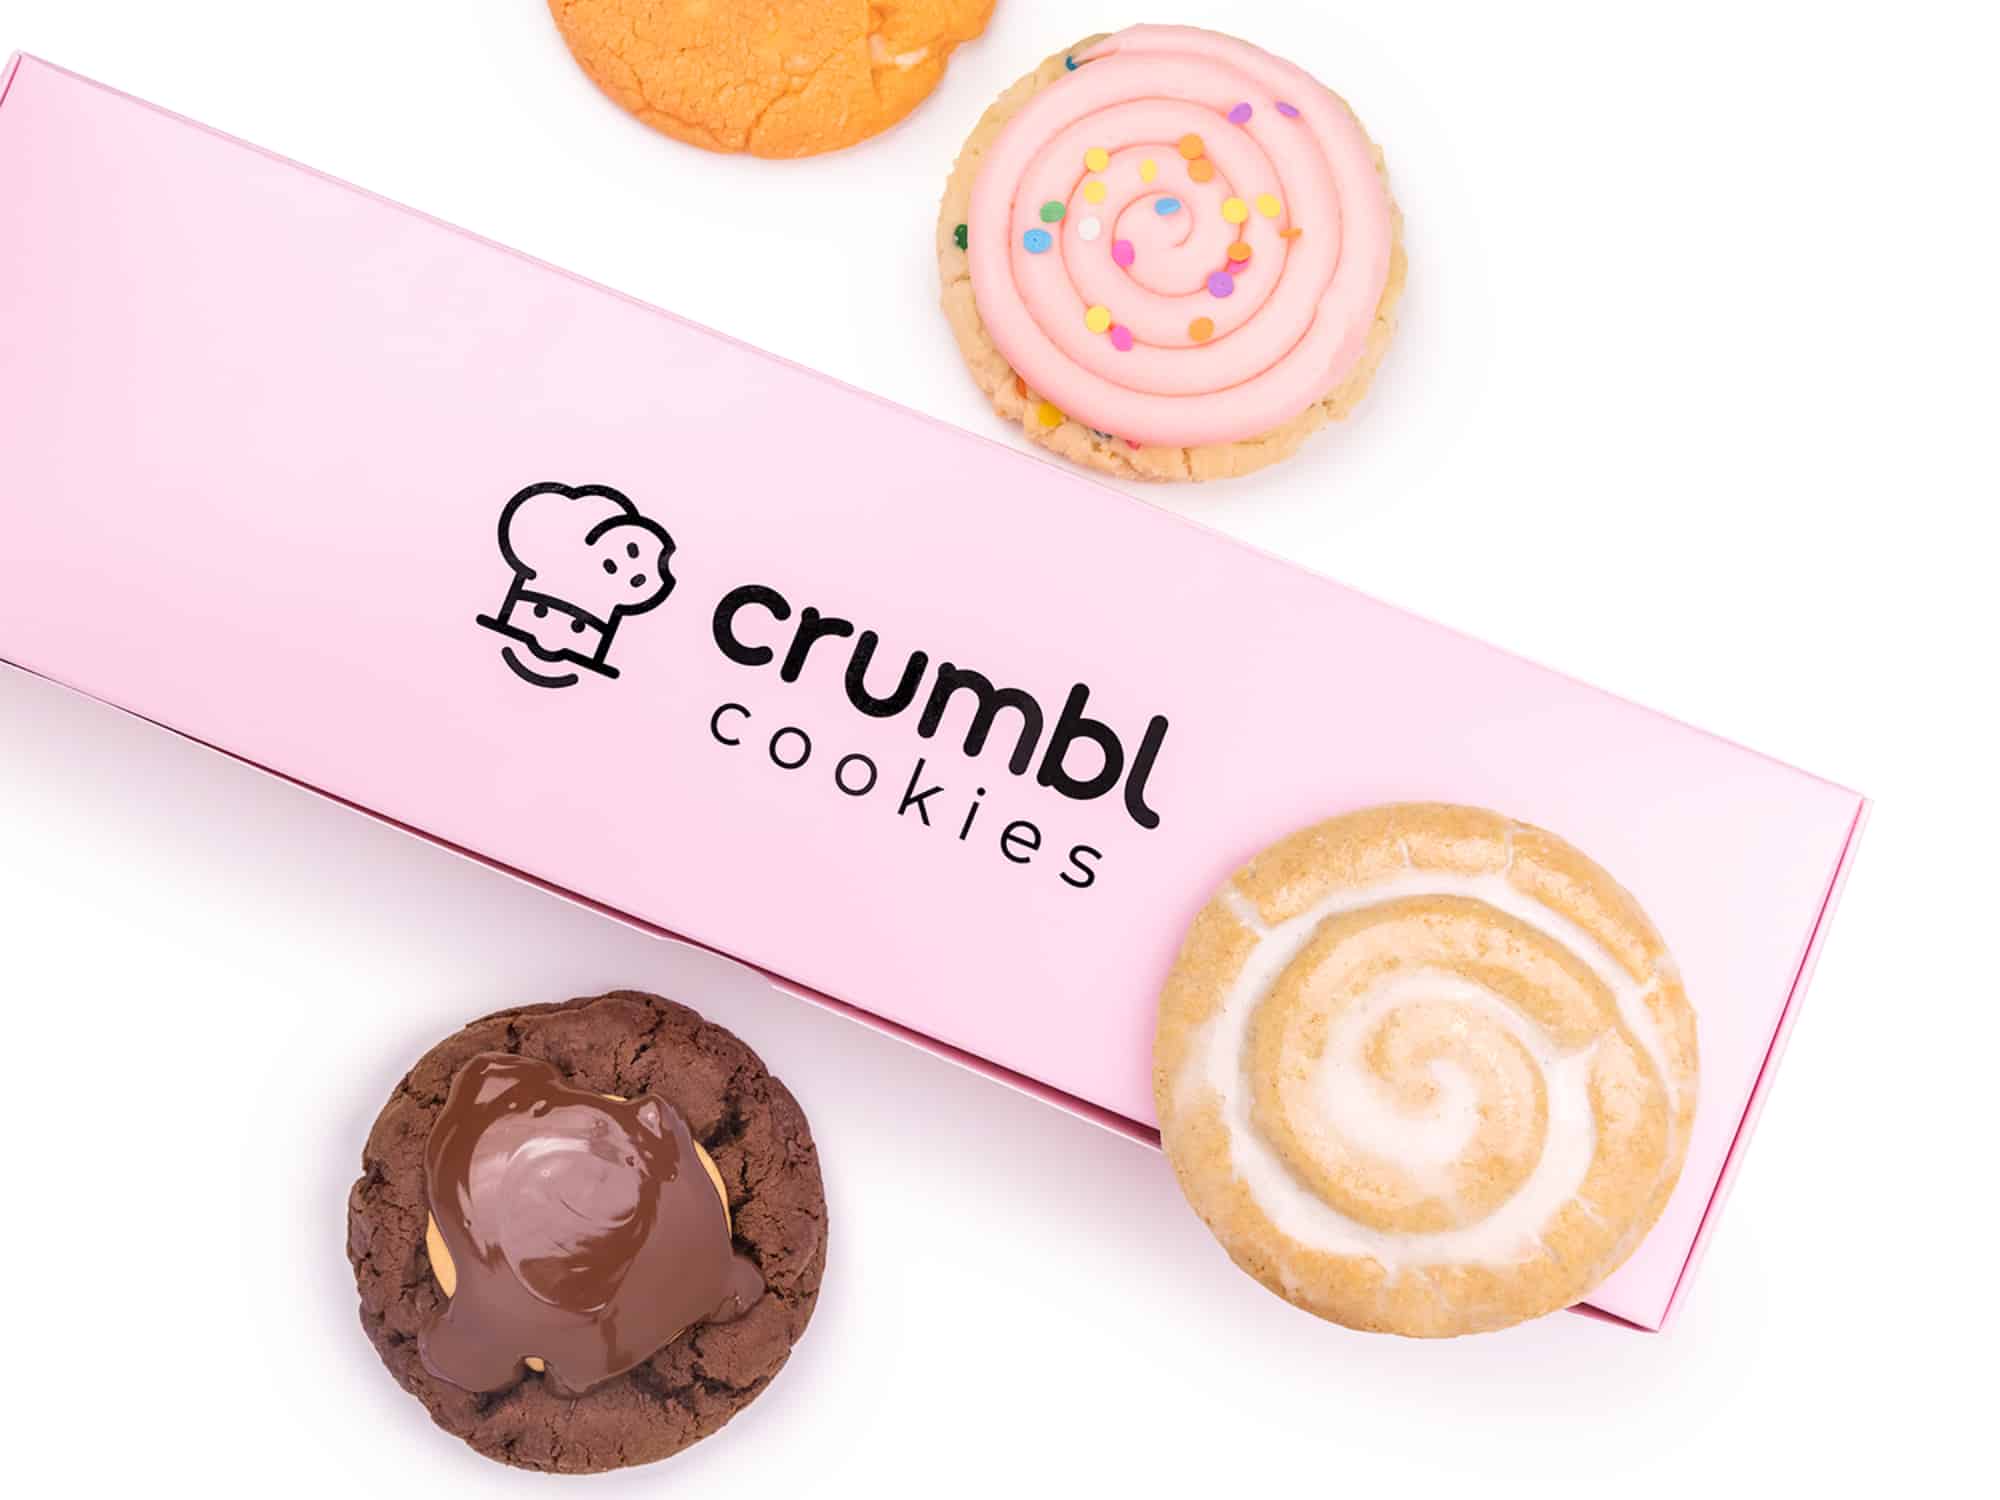 Crumbl Cookies is opening its first NYC location on the Upper East Side | Crumbl Cookies